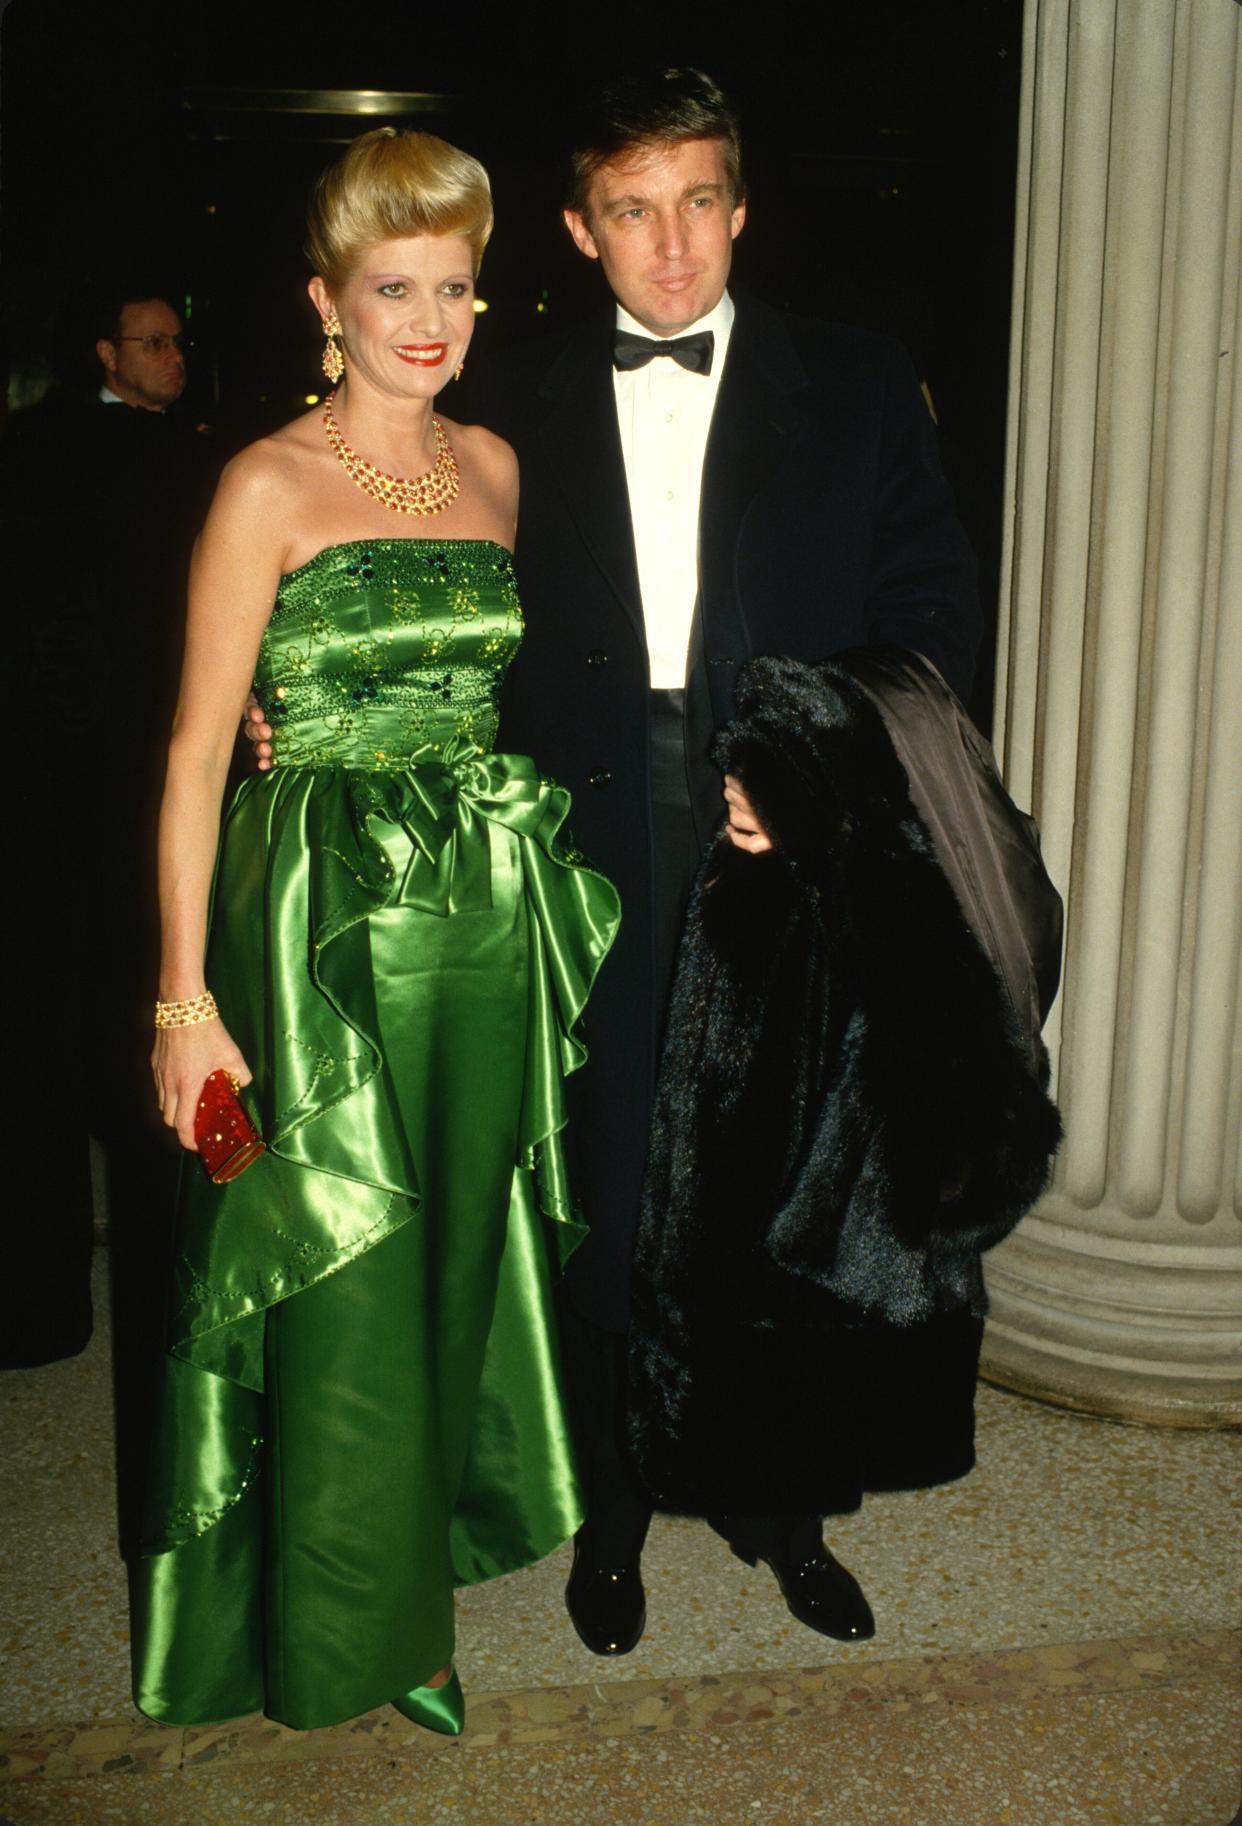 Donald Trump and Ivana Trump at the Met Gala in 1987